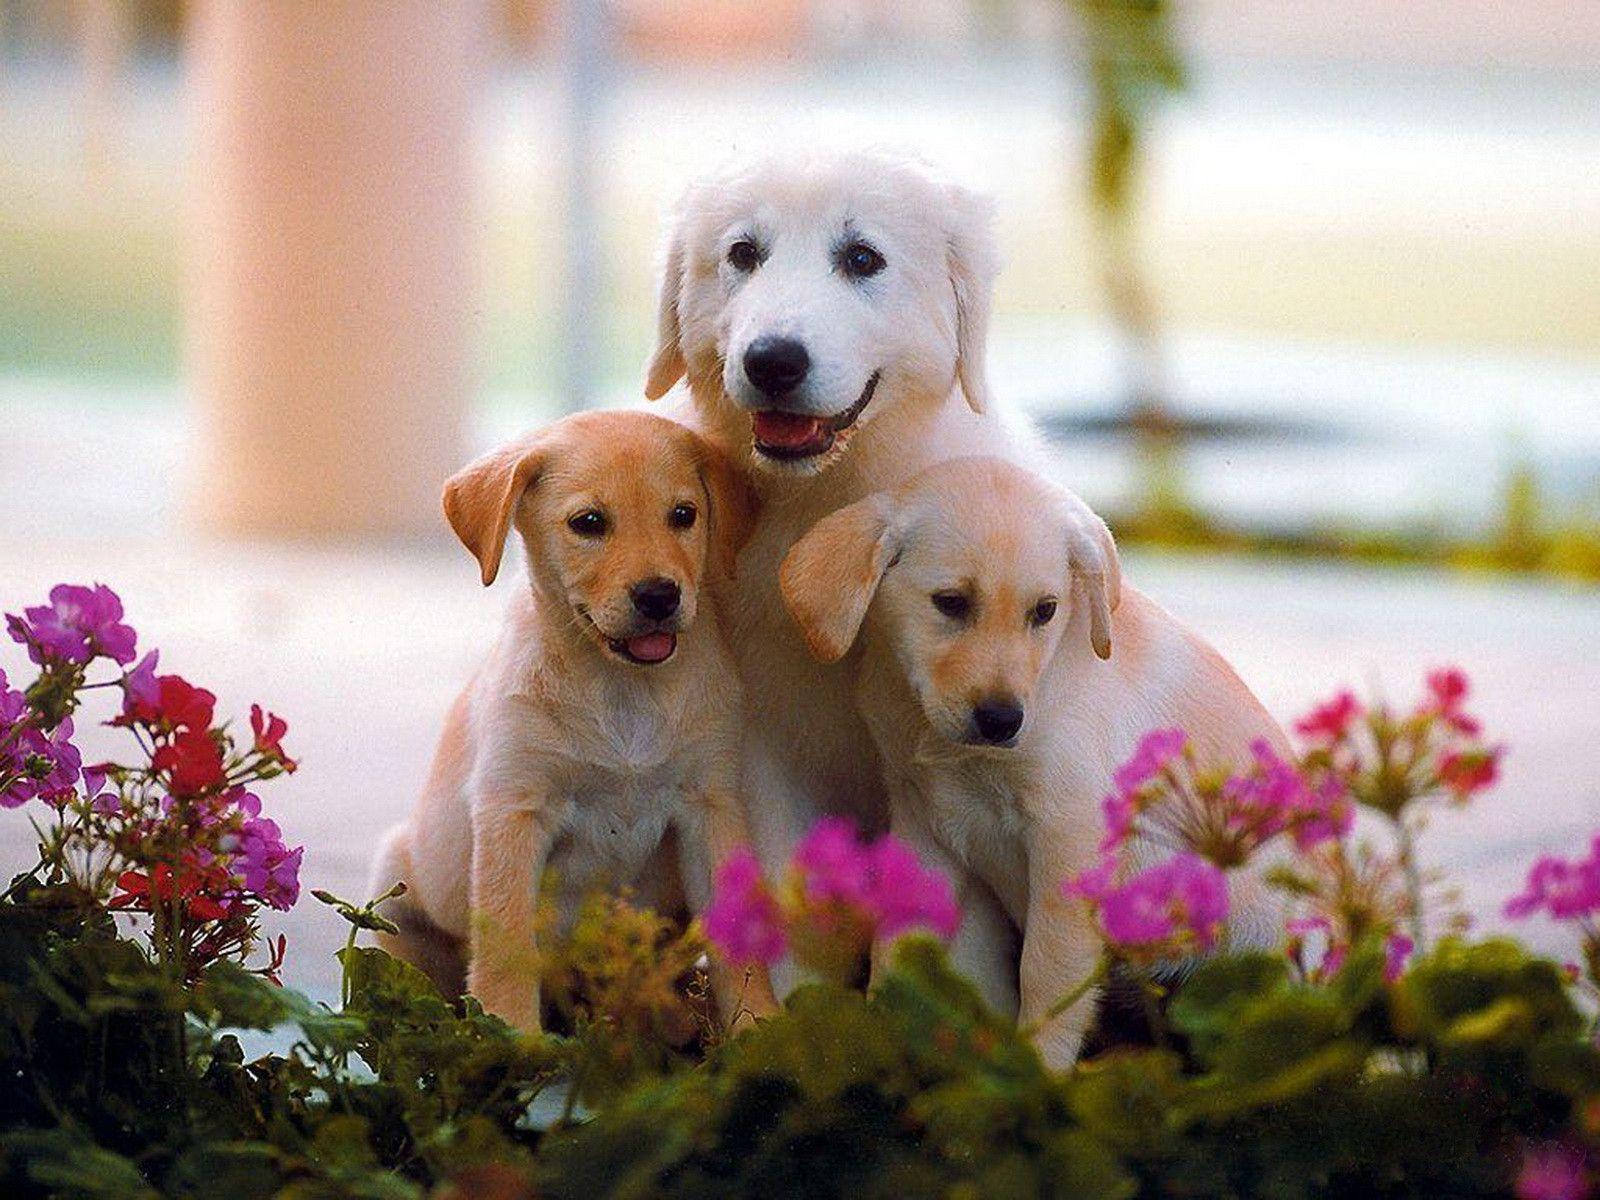 cute dog image download